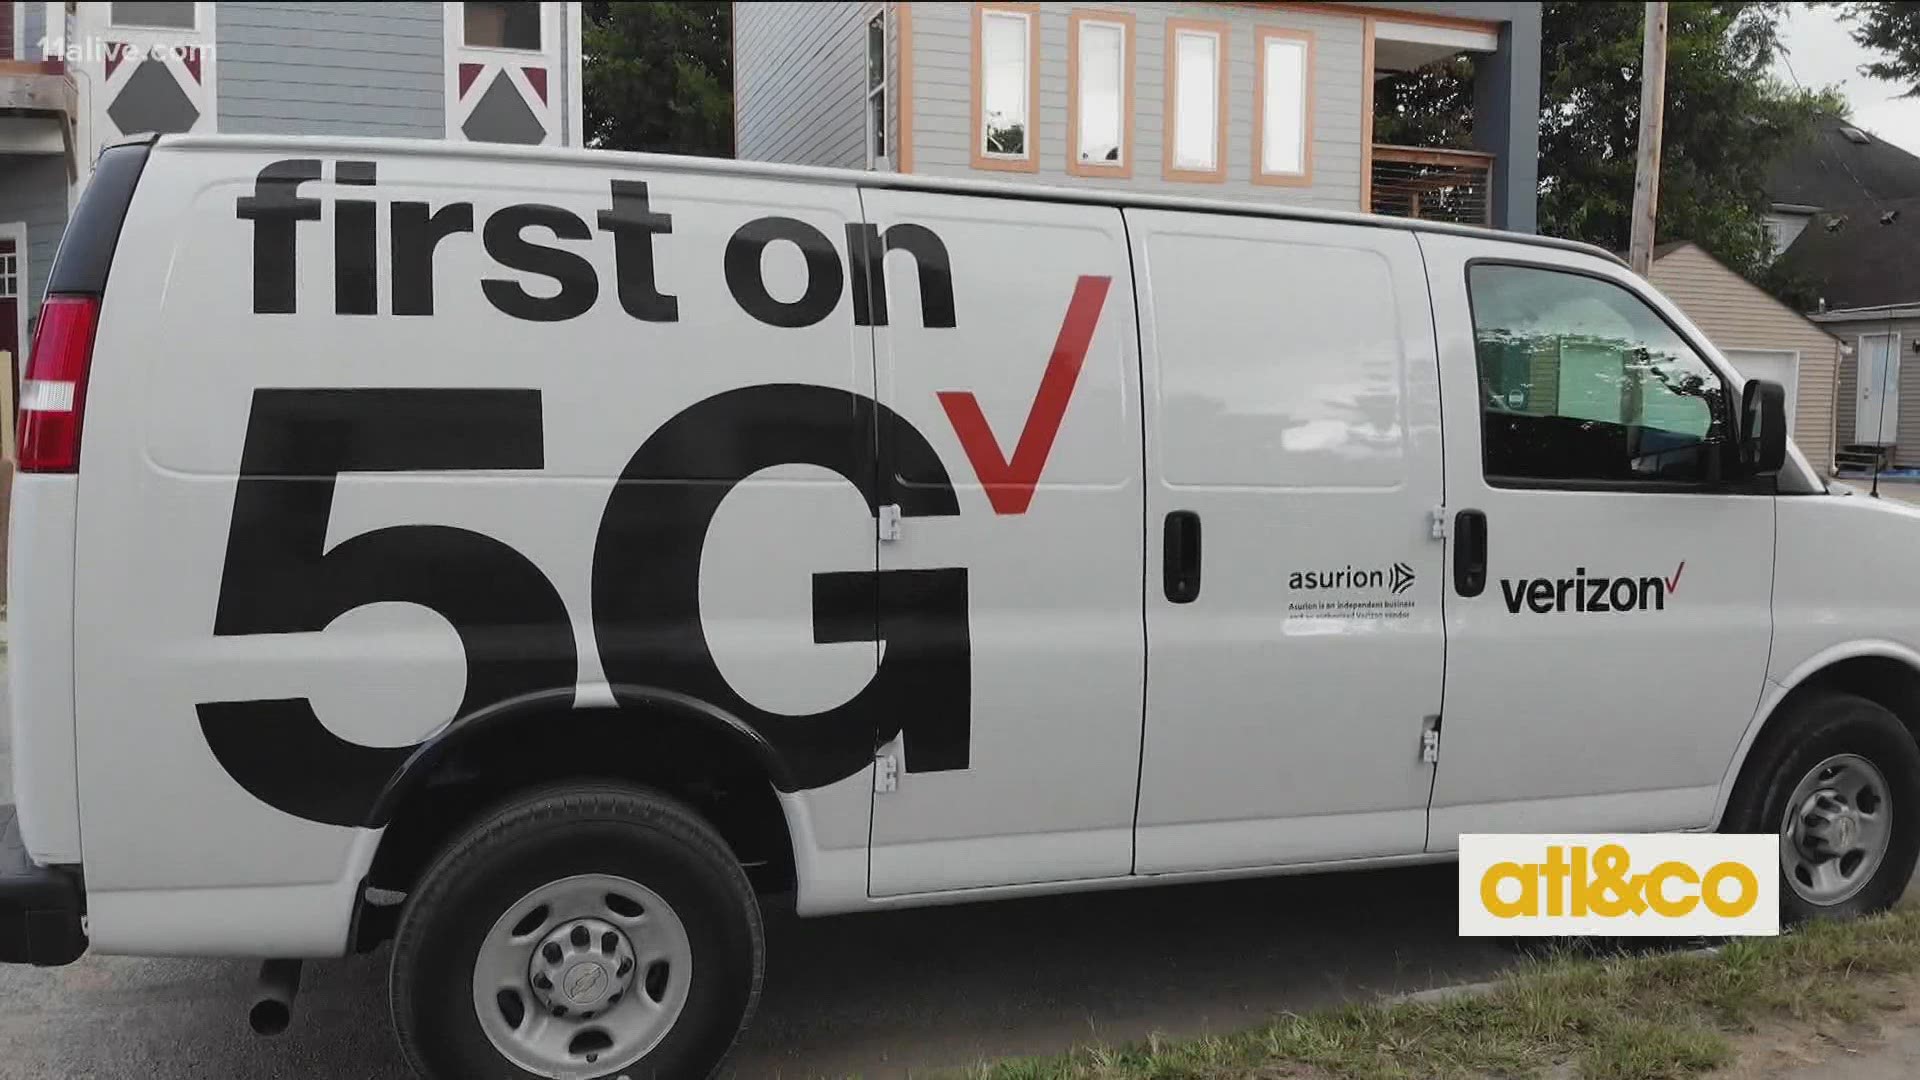 Did you know Verizon's 5G service is now available in Atlanta? Tech specialist David Weissmann shares what that means for you and how it will impact the way we live.